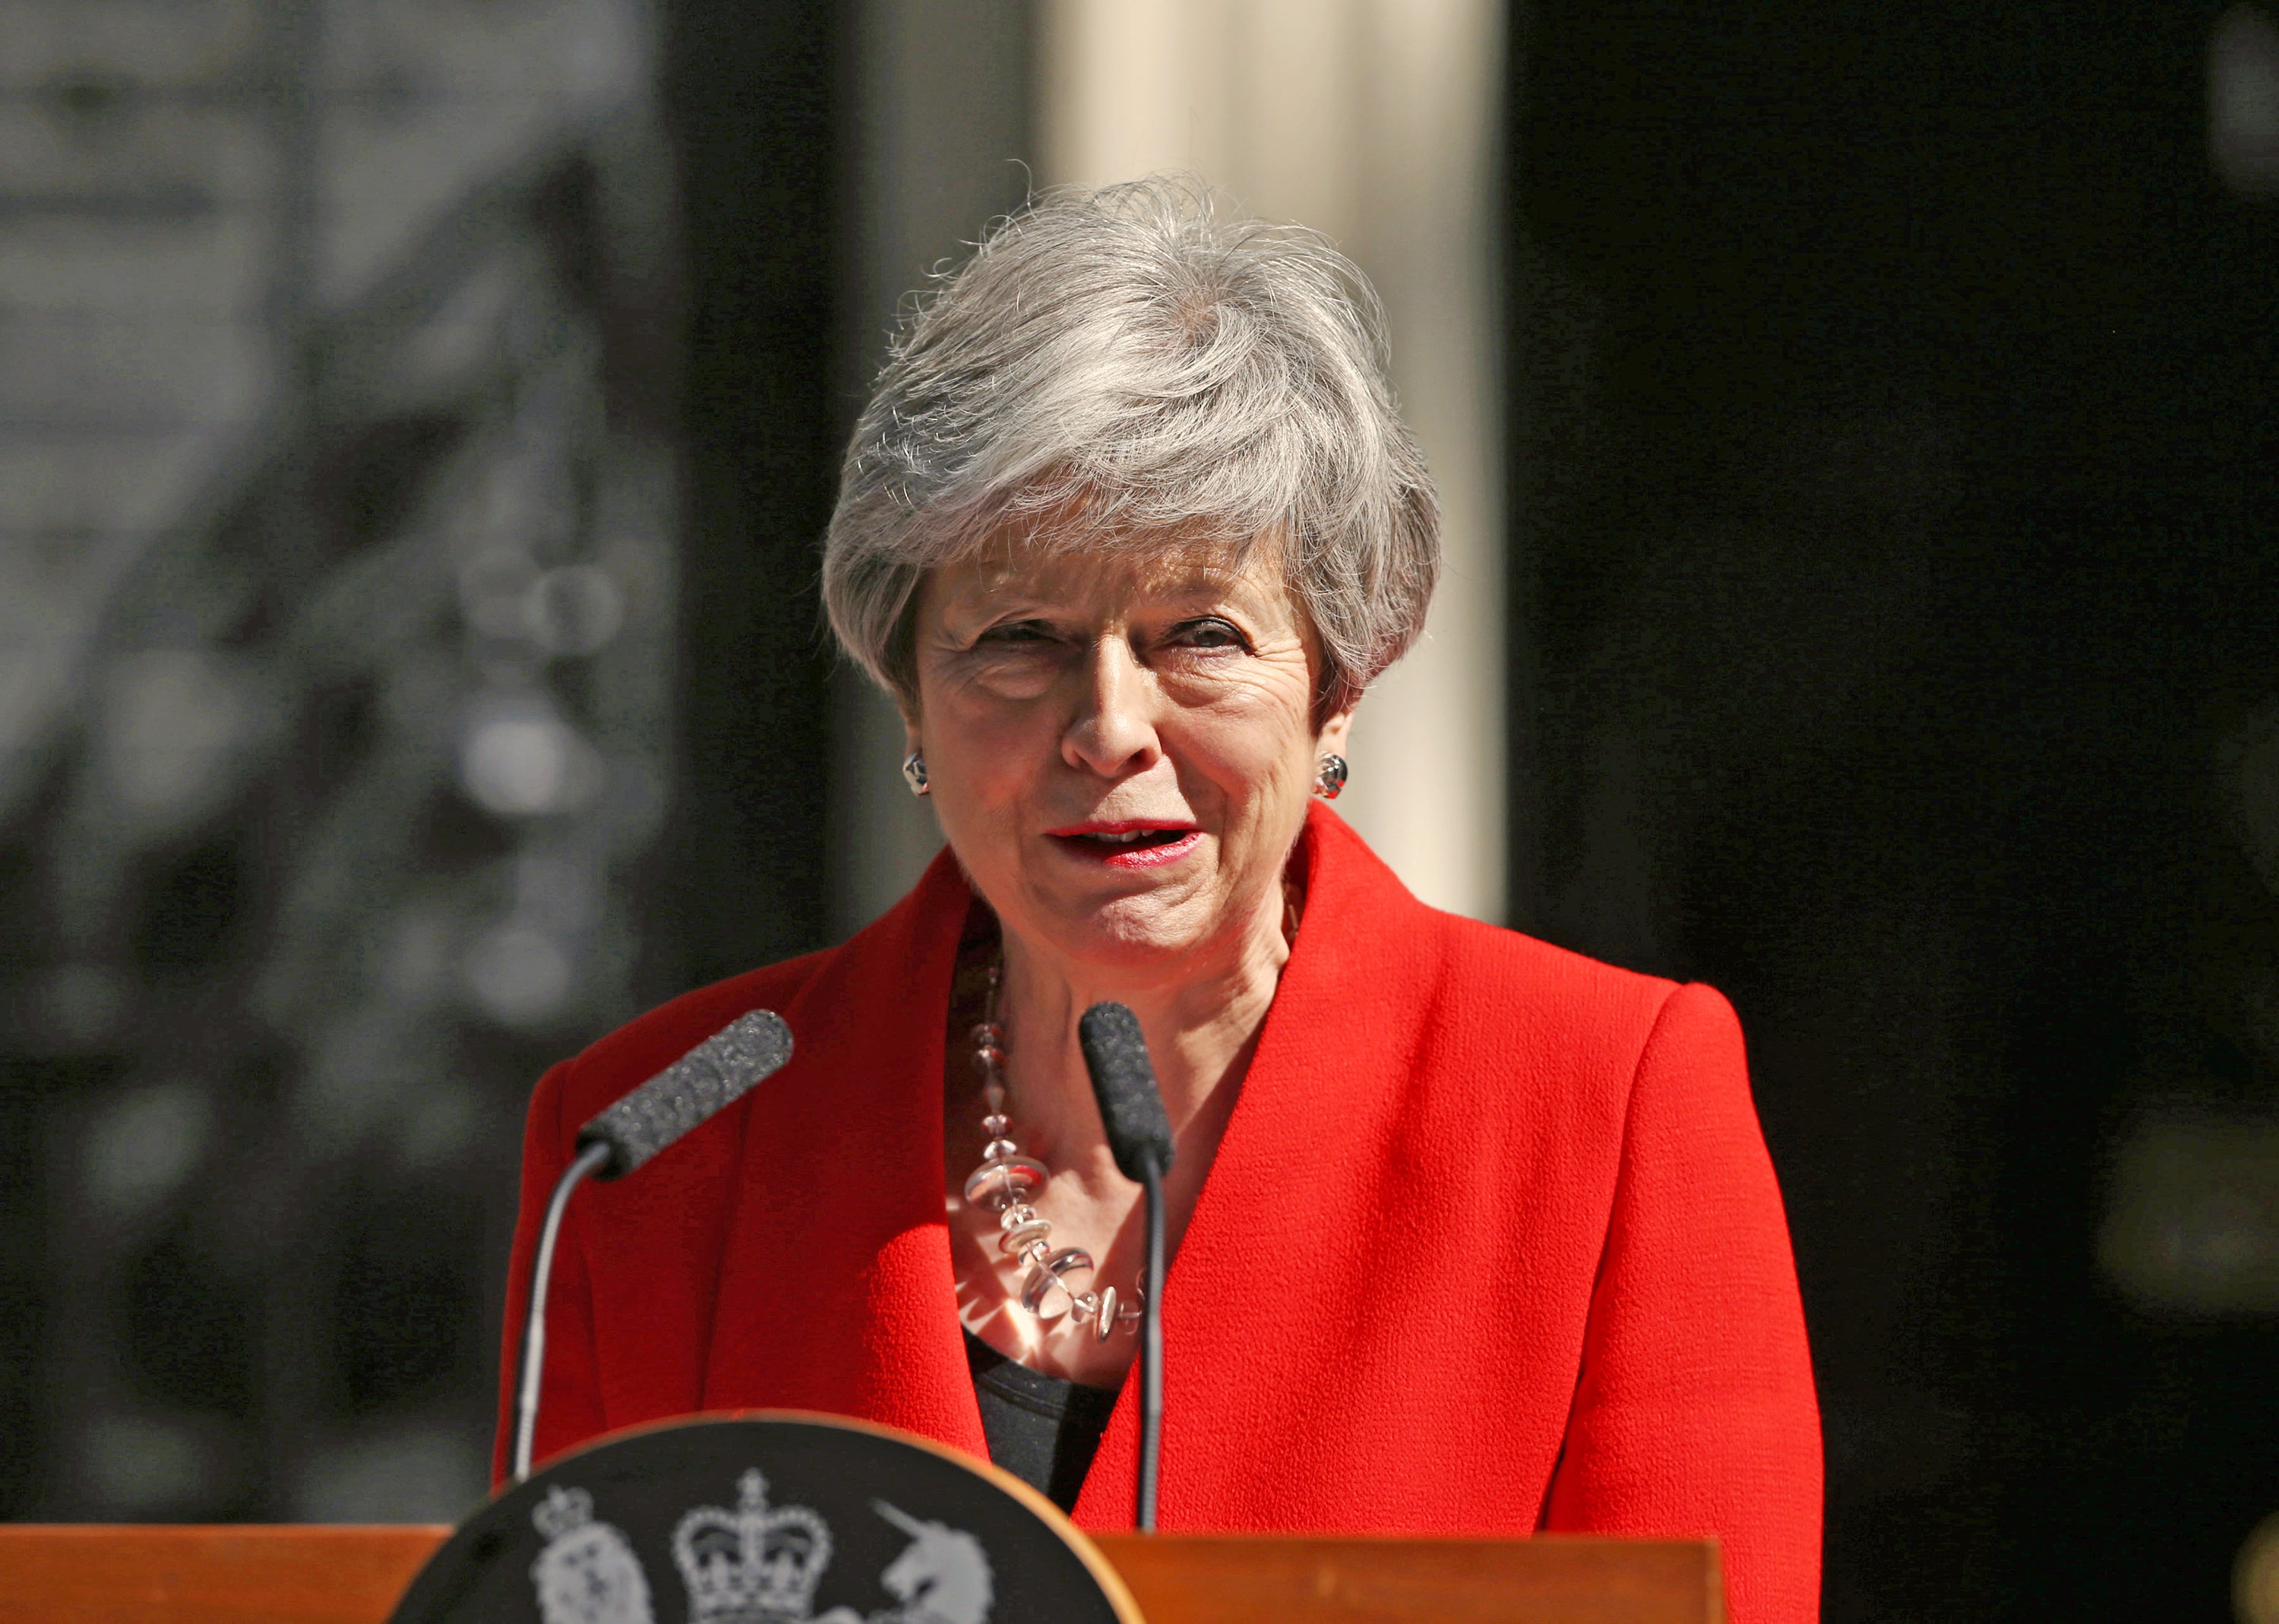 Theresa May announced her resignation from Downing Street in a tearful moment on 24 May 2019